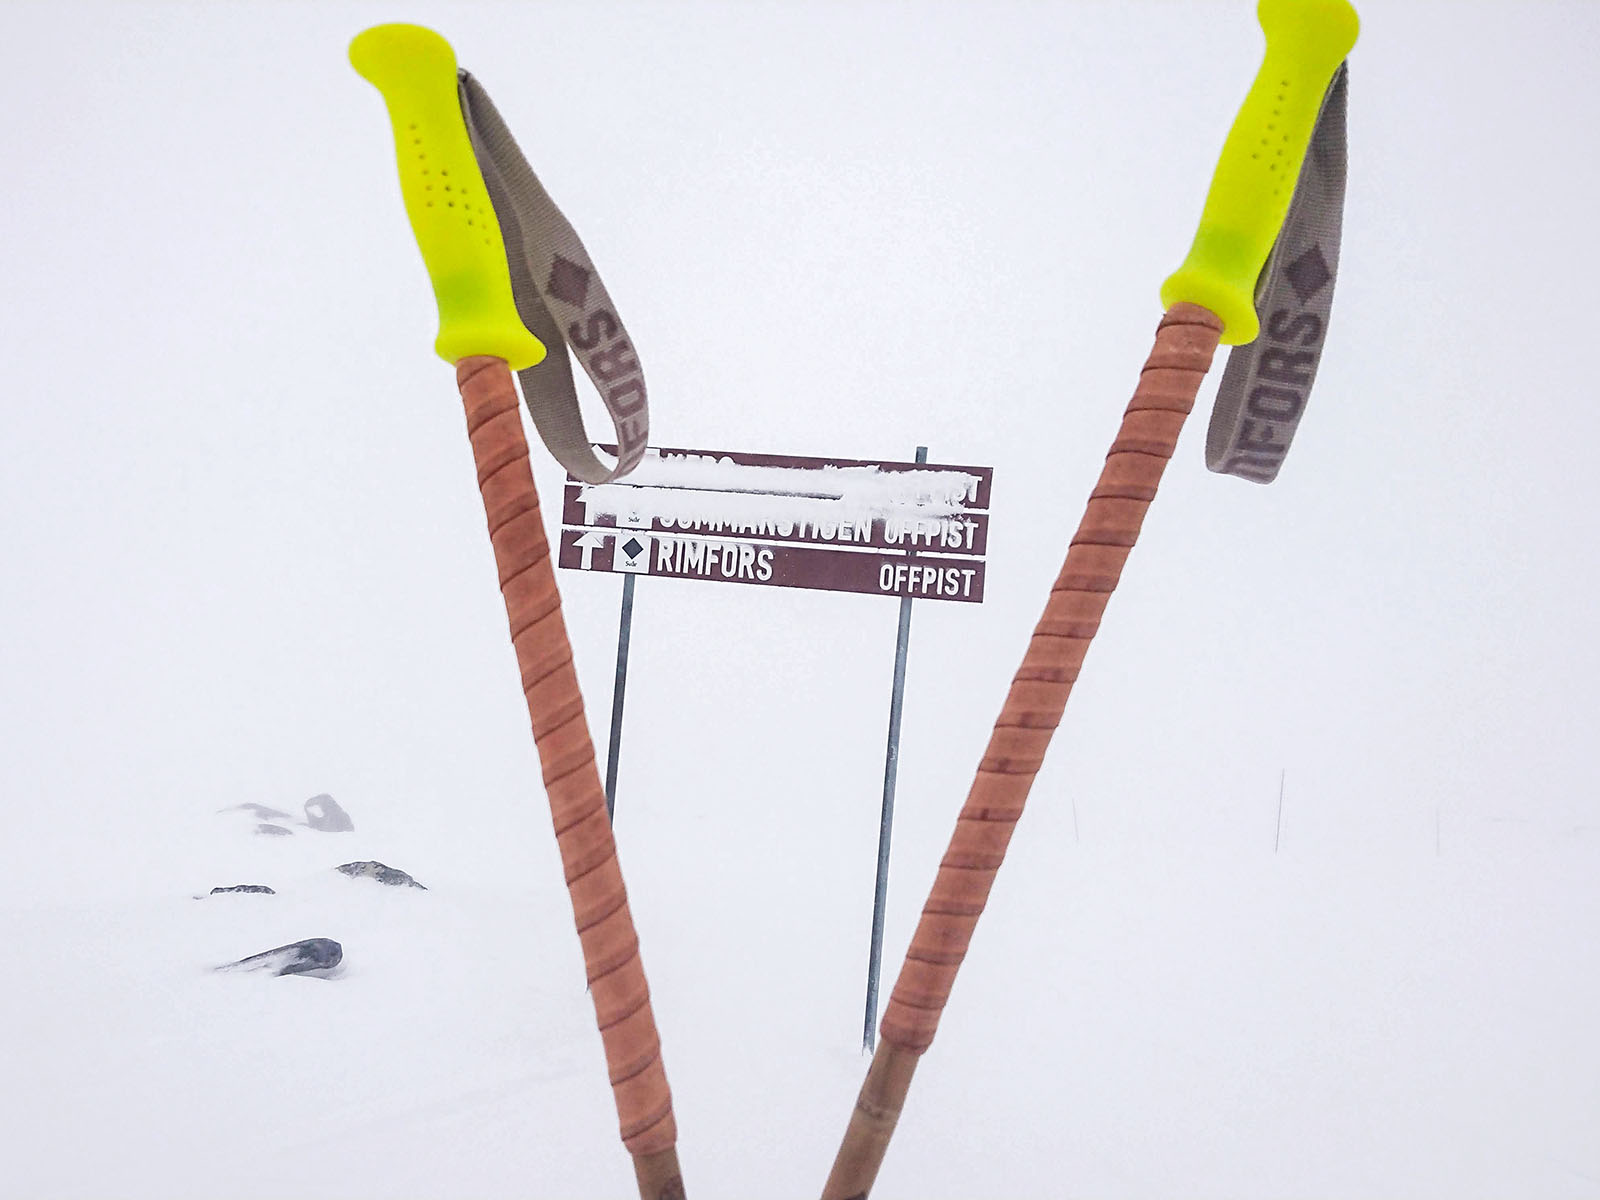 Fluorescent yellow bamboo ski poles with grip extensions of bark tanned reindeer leather, in front of the Rimfors black diamond off-piste run in Riksgränsen.